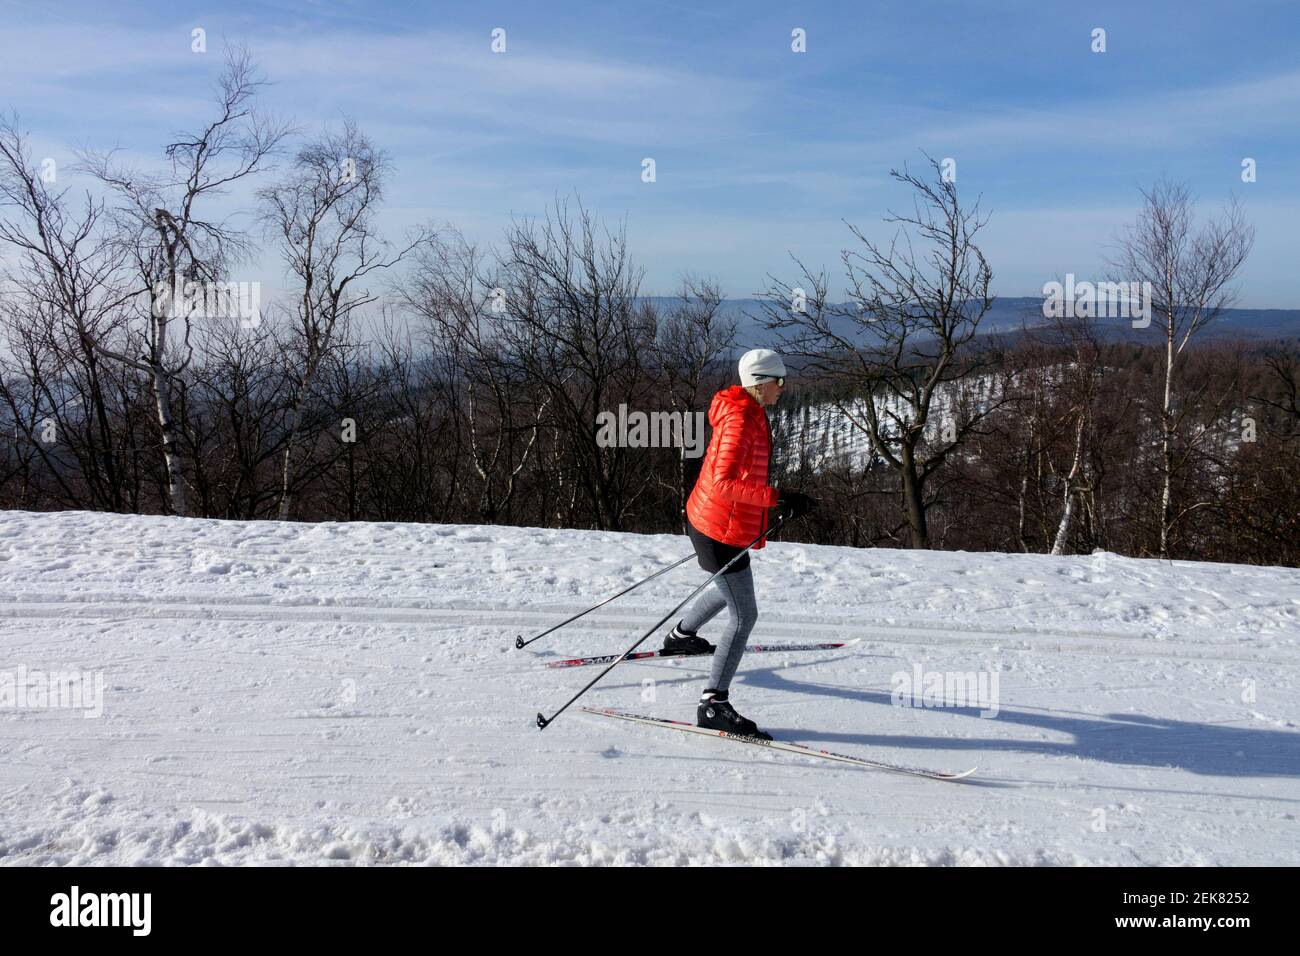 Winter lifestyle woman skiing in landscape Woman skiing alone Stock Photo